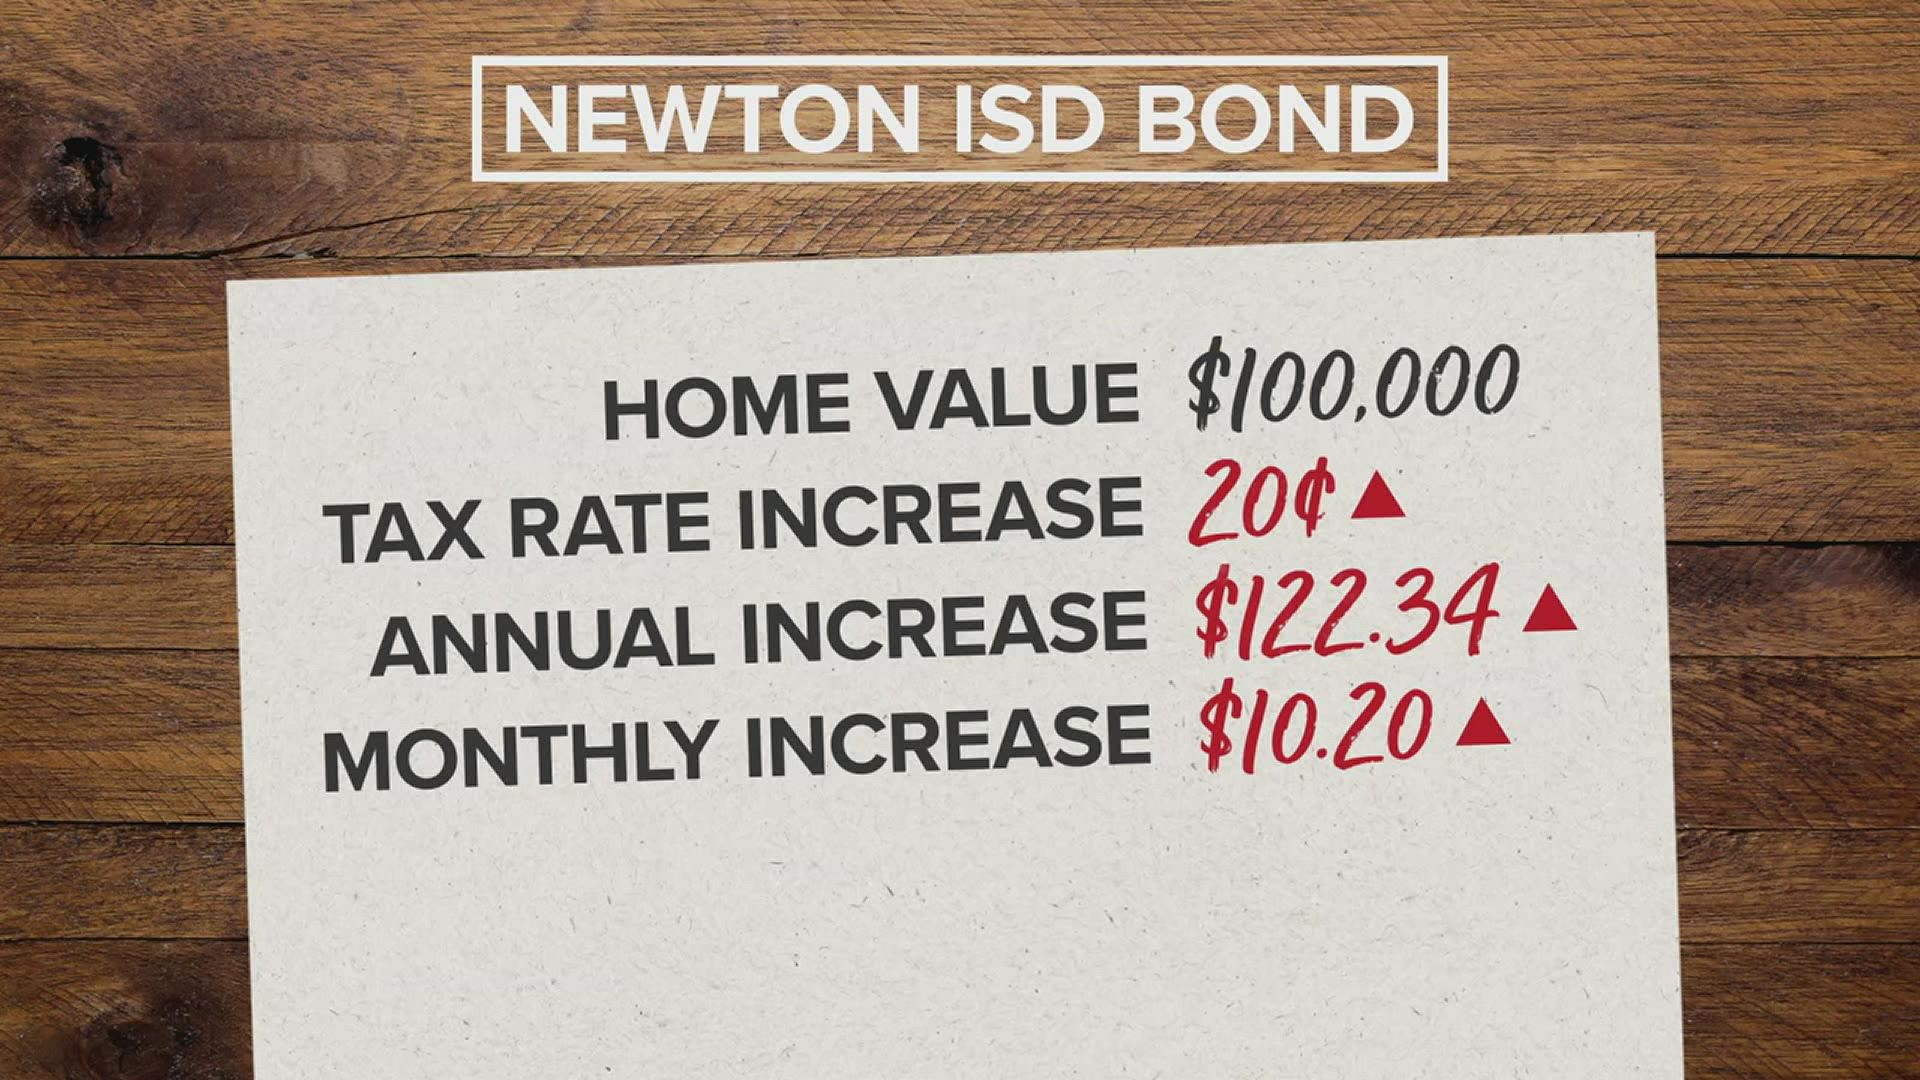 With the proposed bond, a home valued at $100,000 would see an increase of $122 a year or $10 a month.